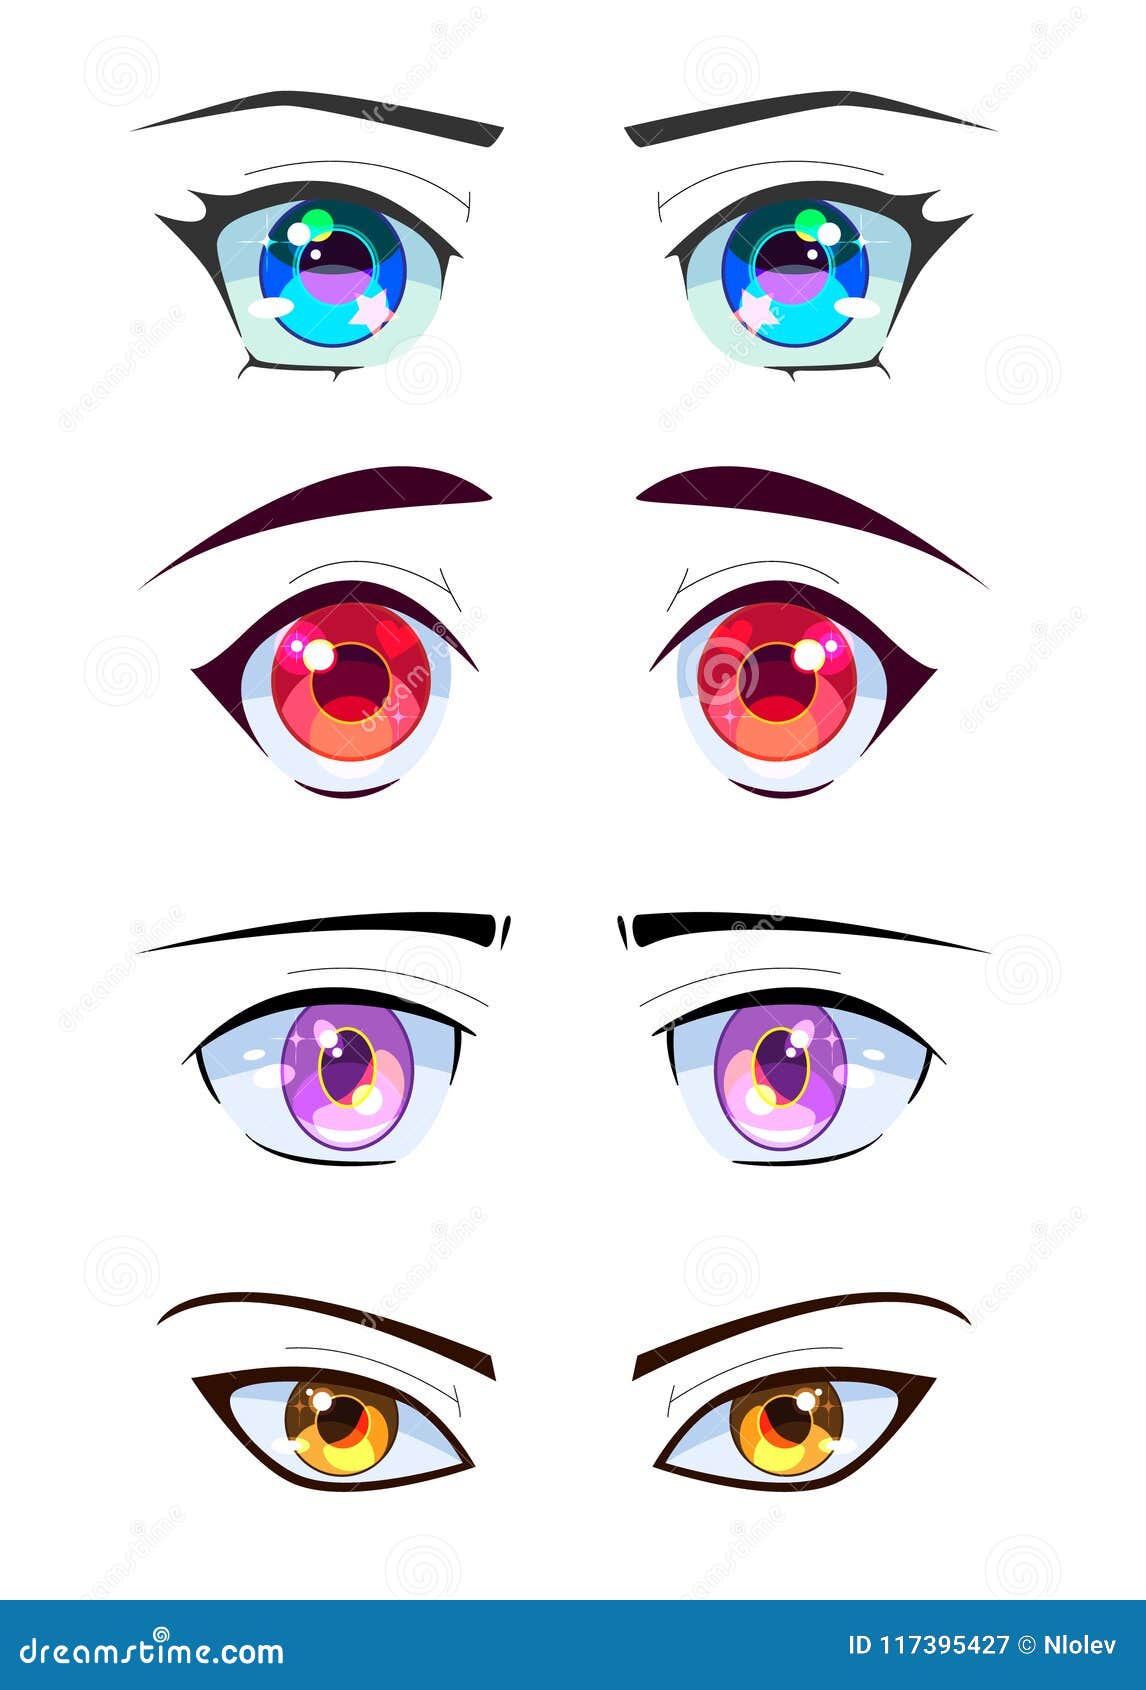 How To Color Anime Eyes Digitally Step by Step Drawing Guide by Dawn   DragoArt